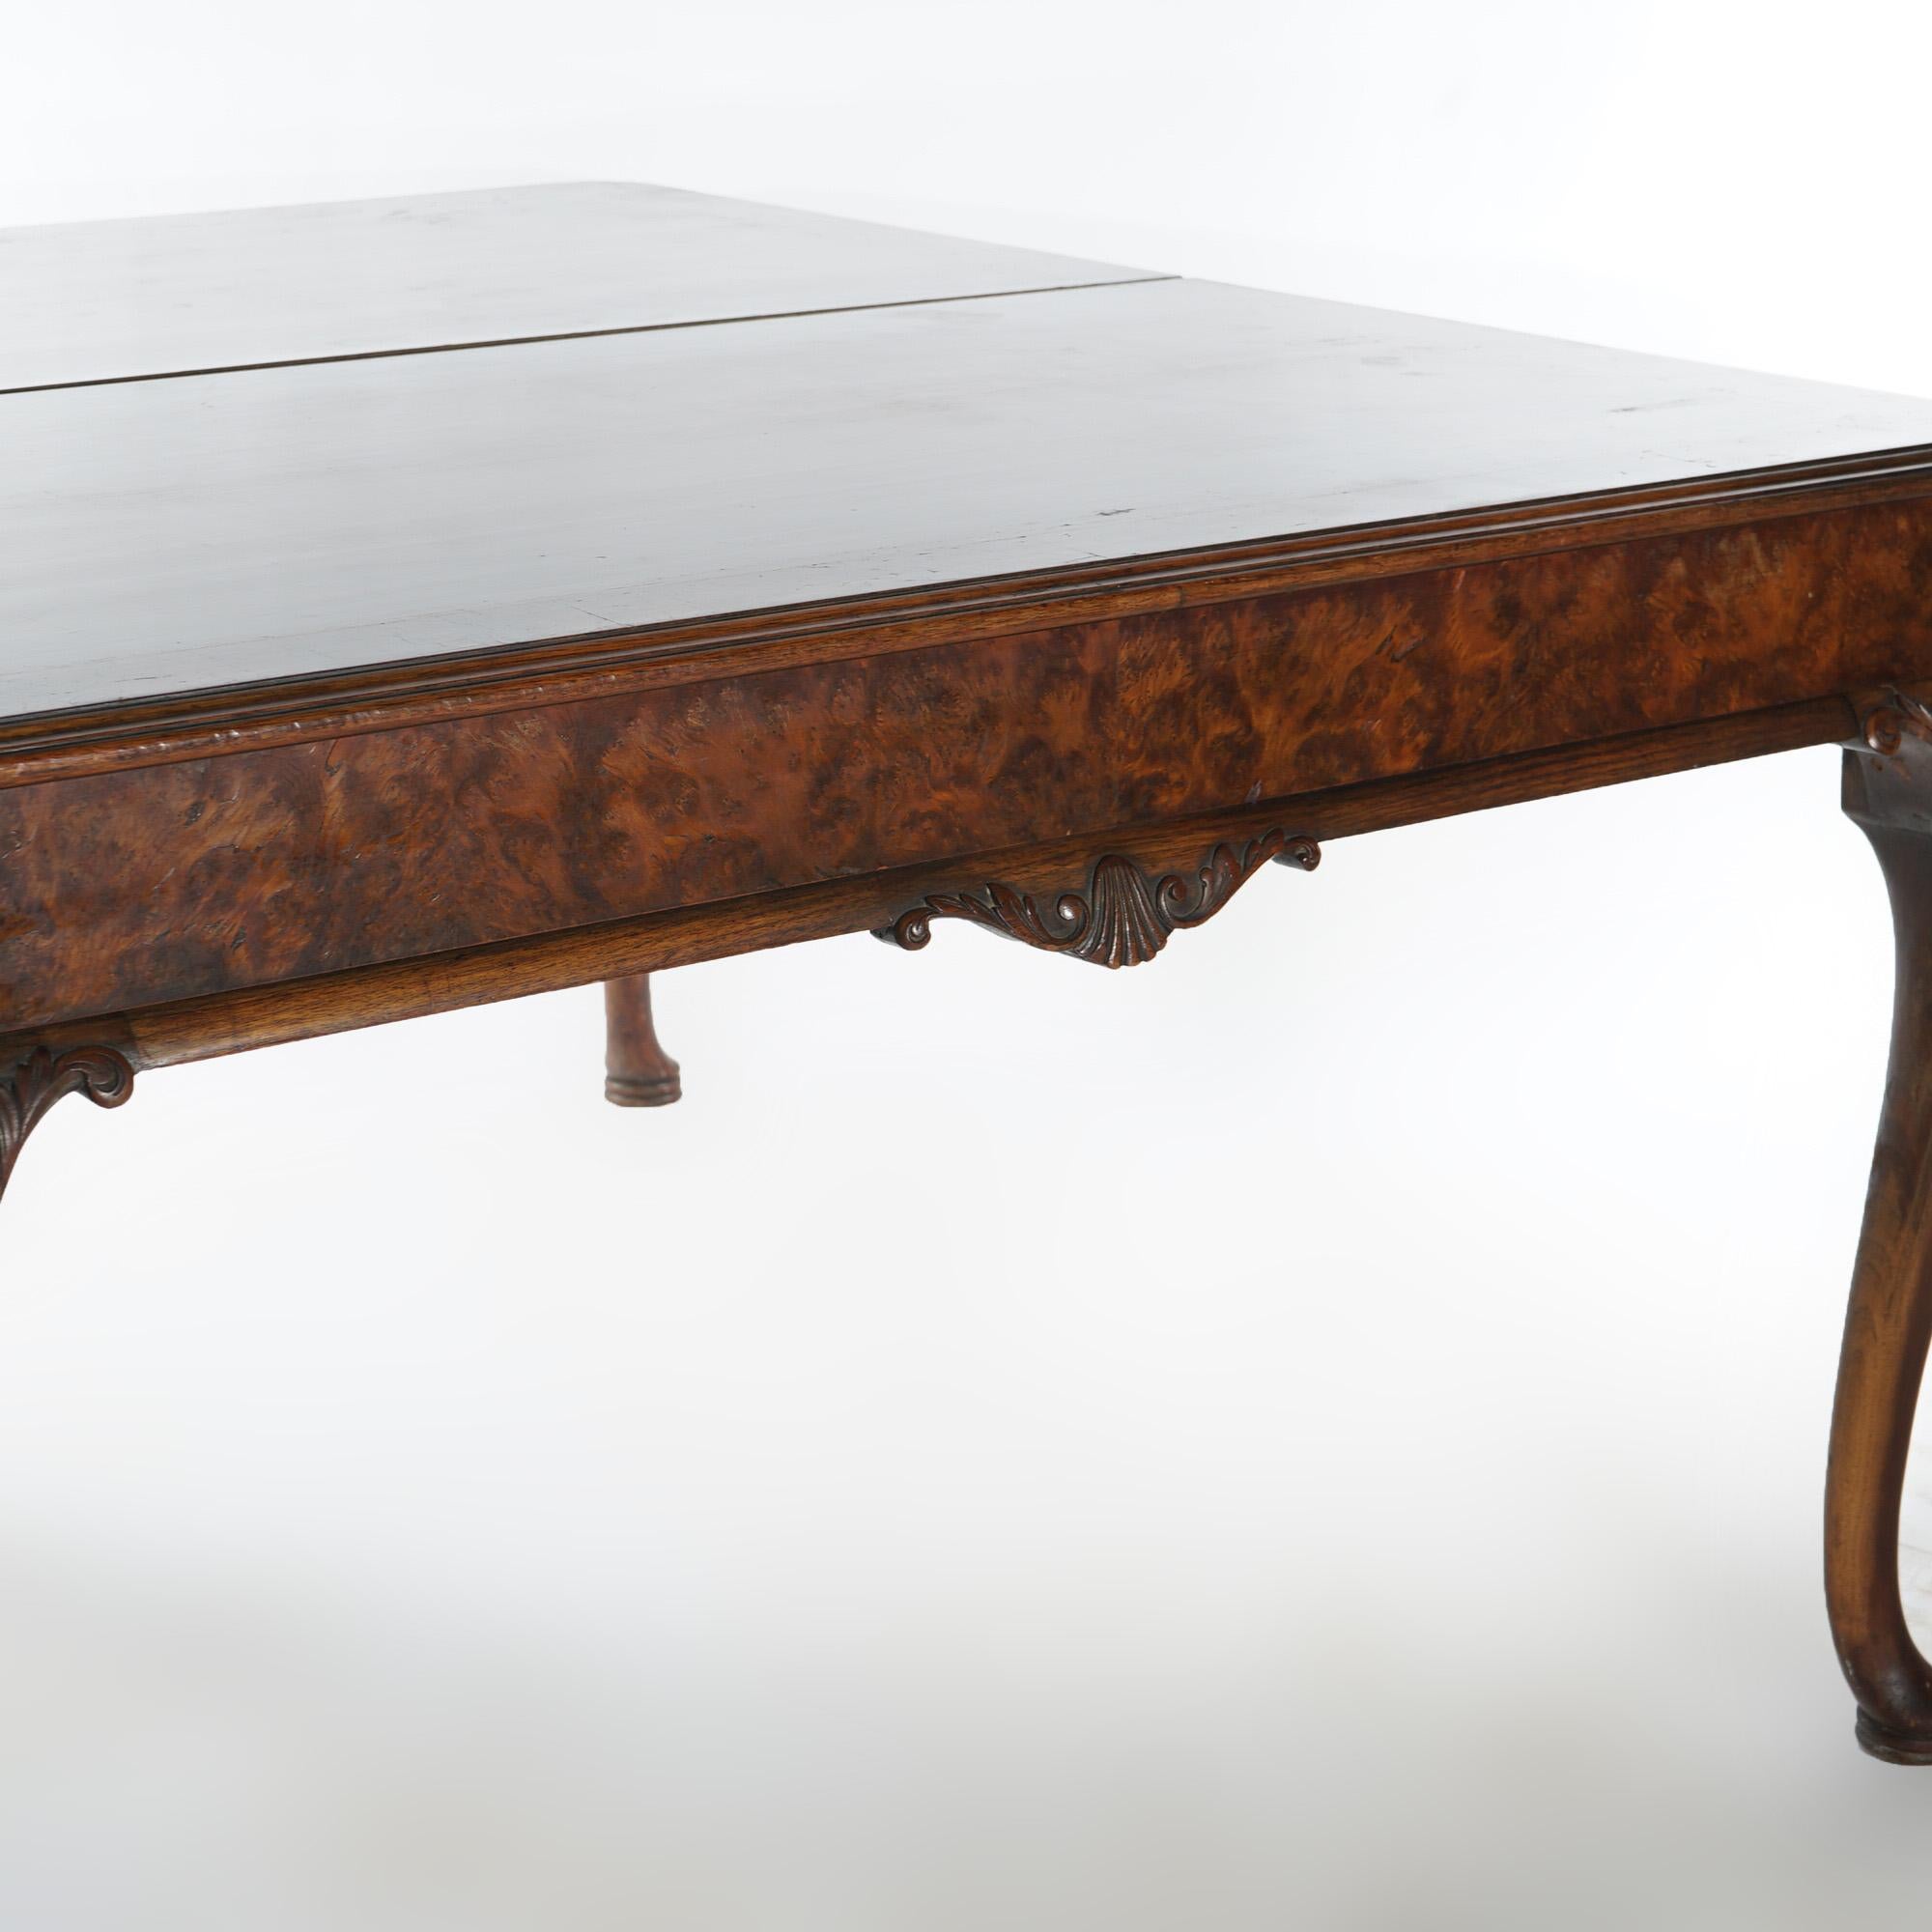 Antique Queen Anne Style Mahogany Banded Inlaid Dining Table & Two Leaves 1930 In Good Condition For Sale In Big Flats, NY